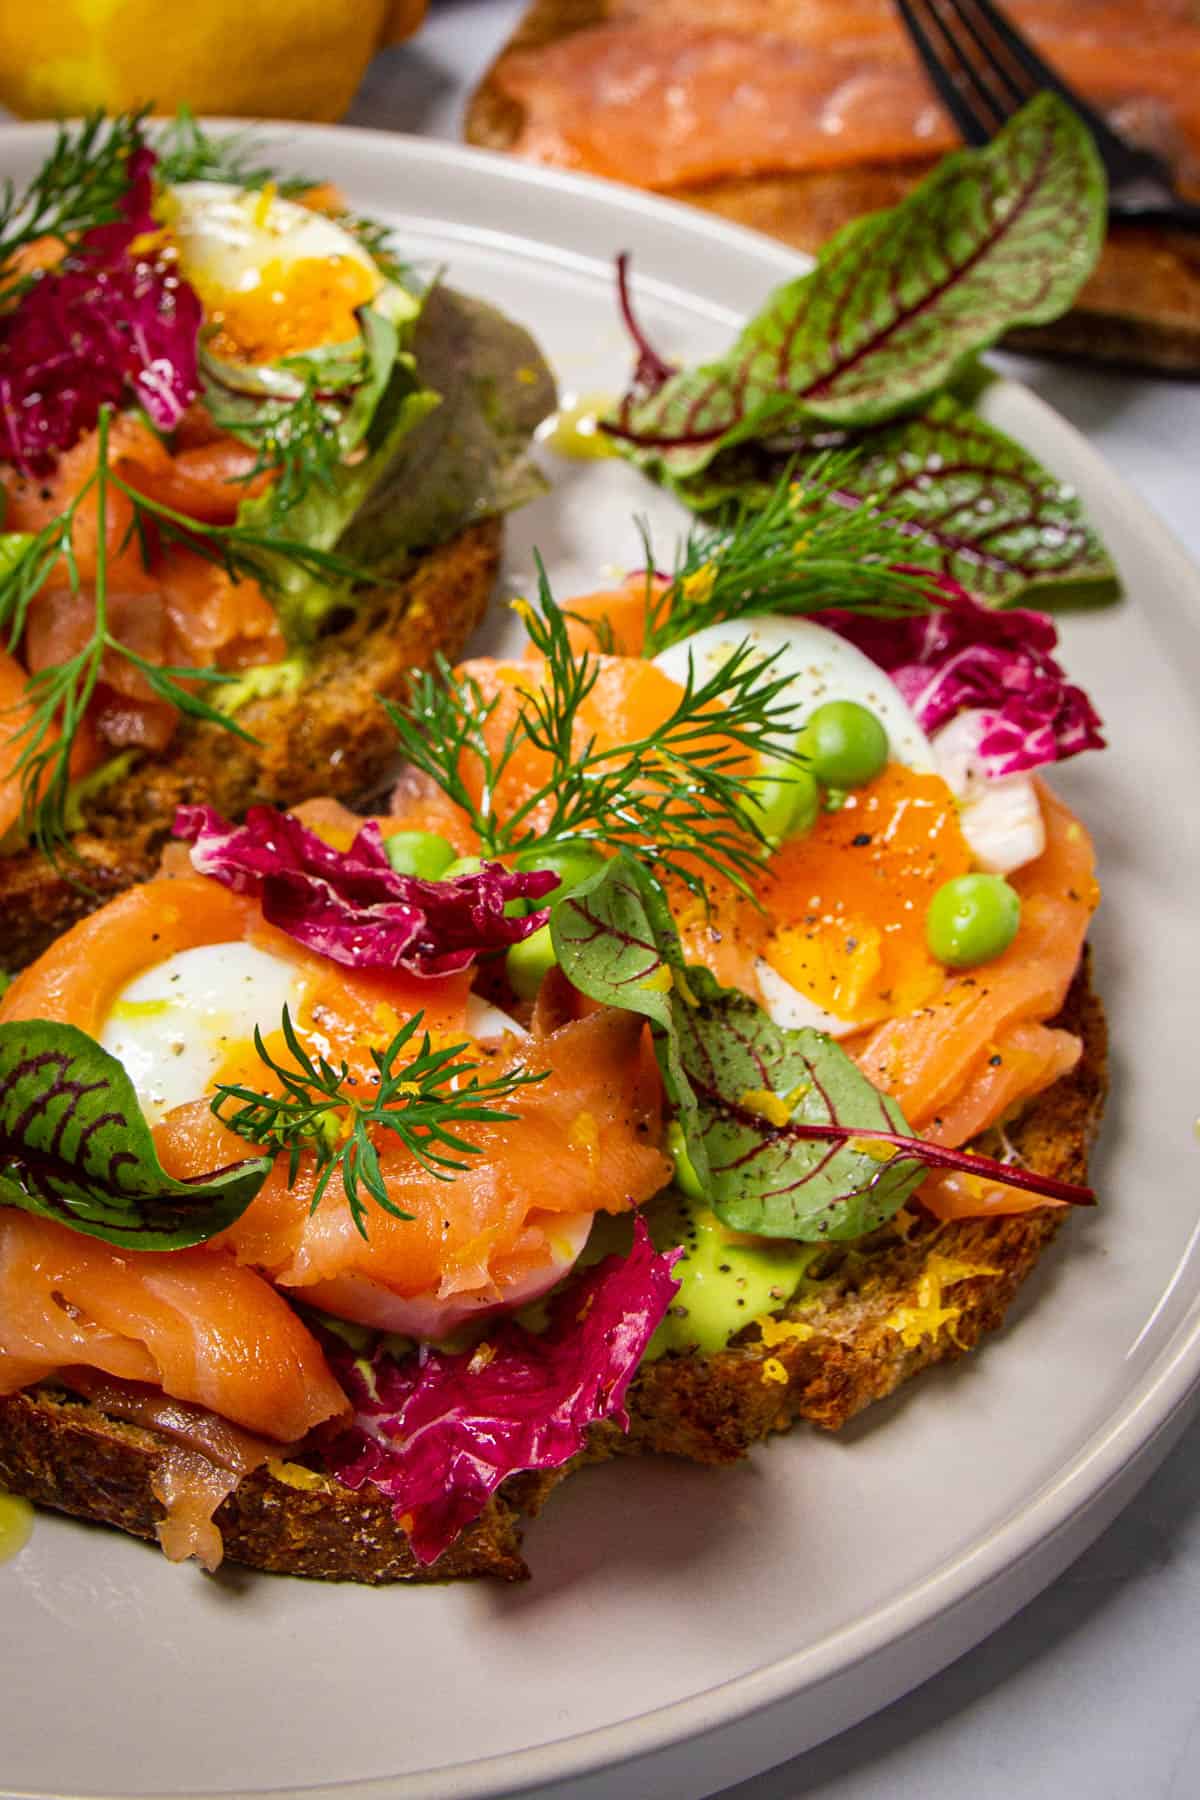 A close up shot of the smoked salmon toast.